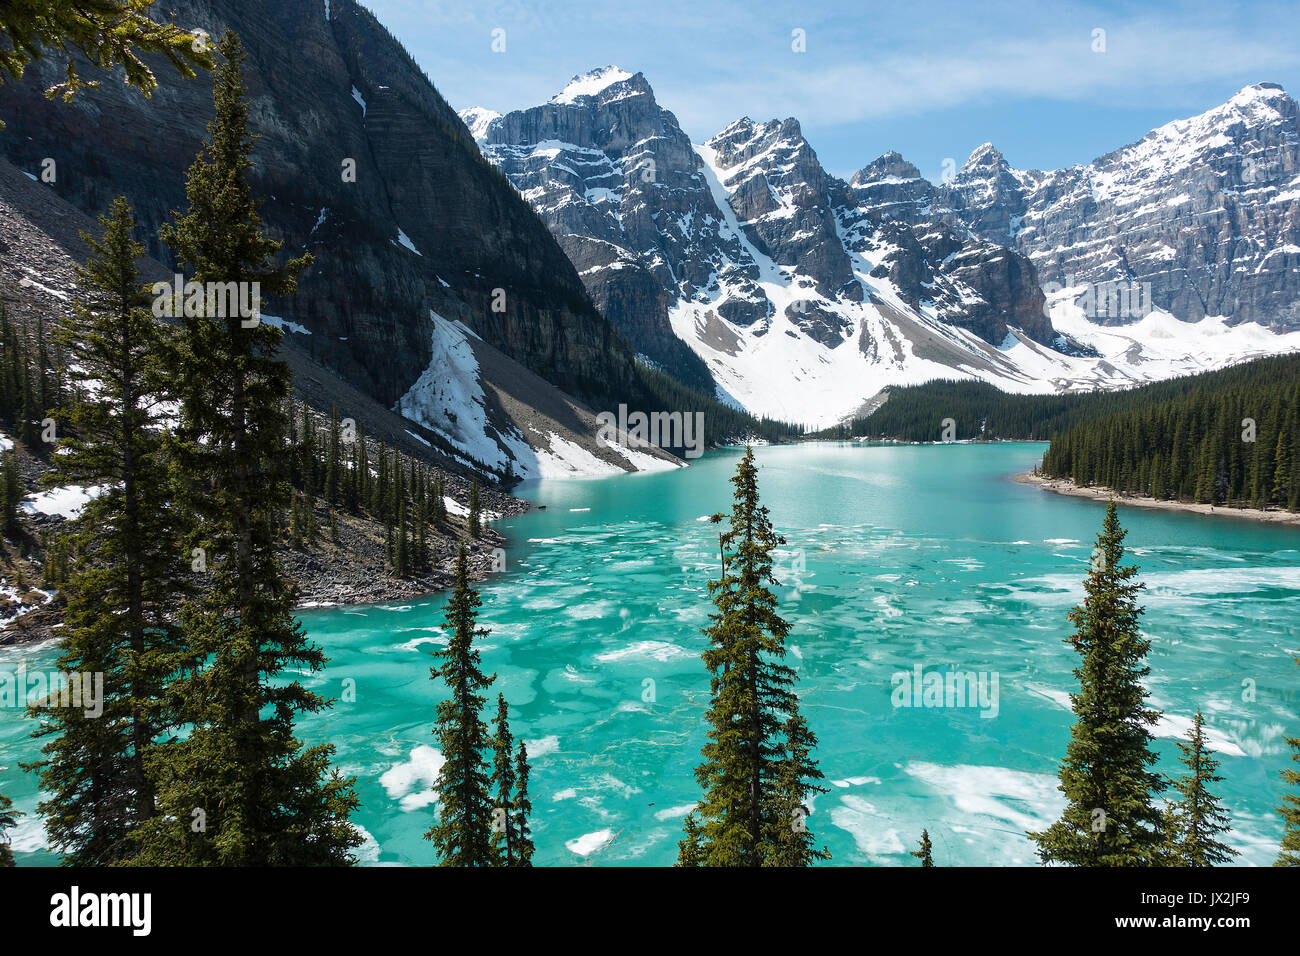 The Stunning Green Waters of Moraine Lake in Banff National Park Canadian Rockies Alberta Canada Stock Photo